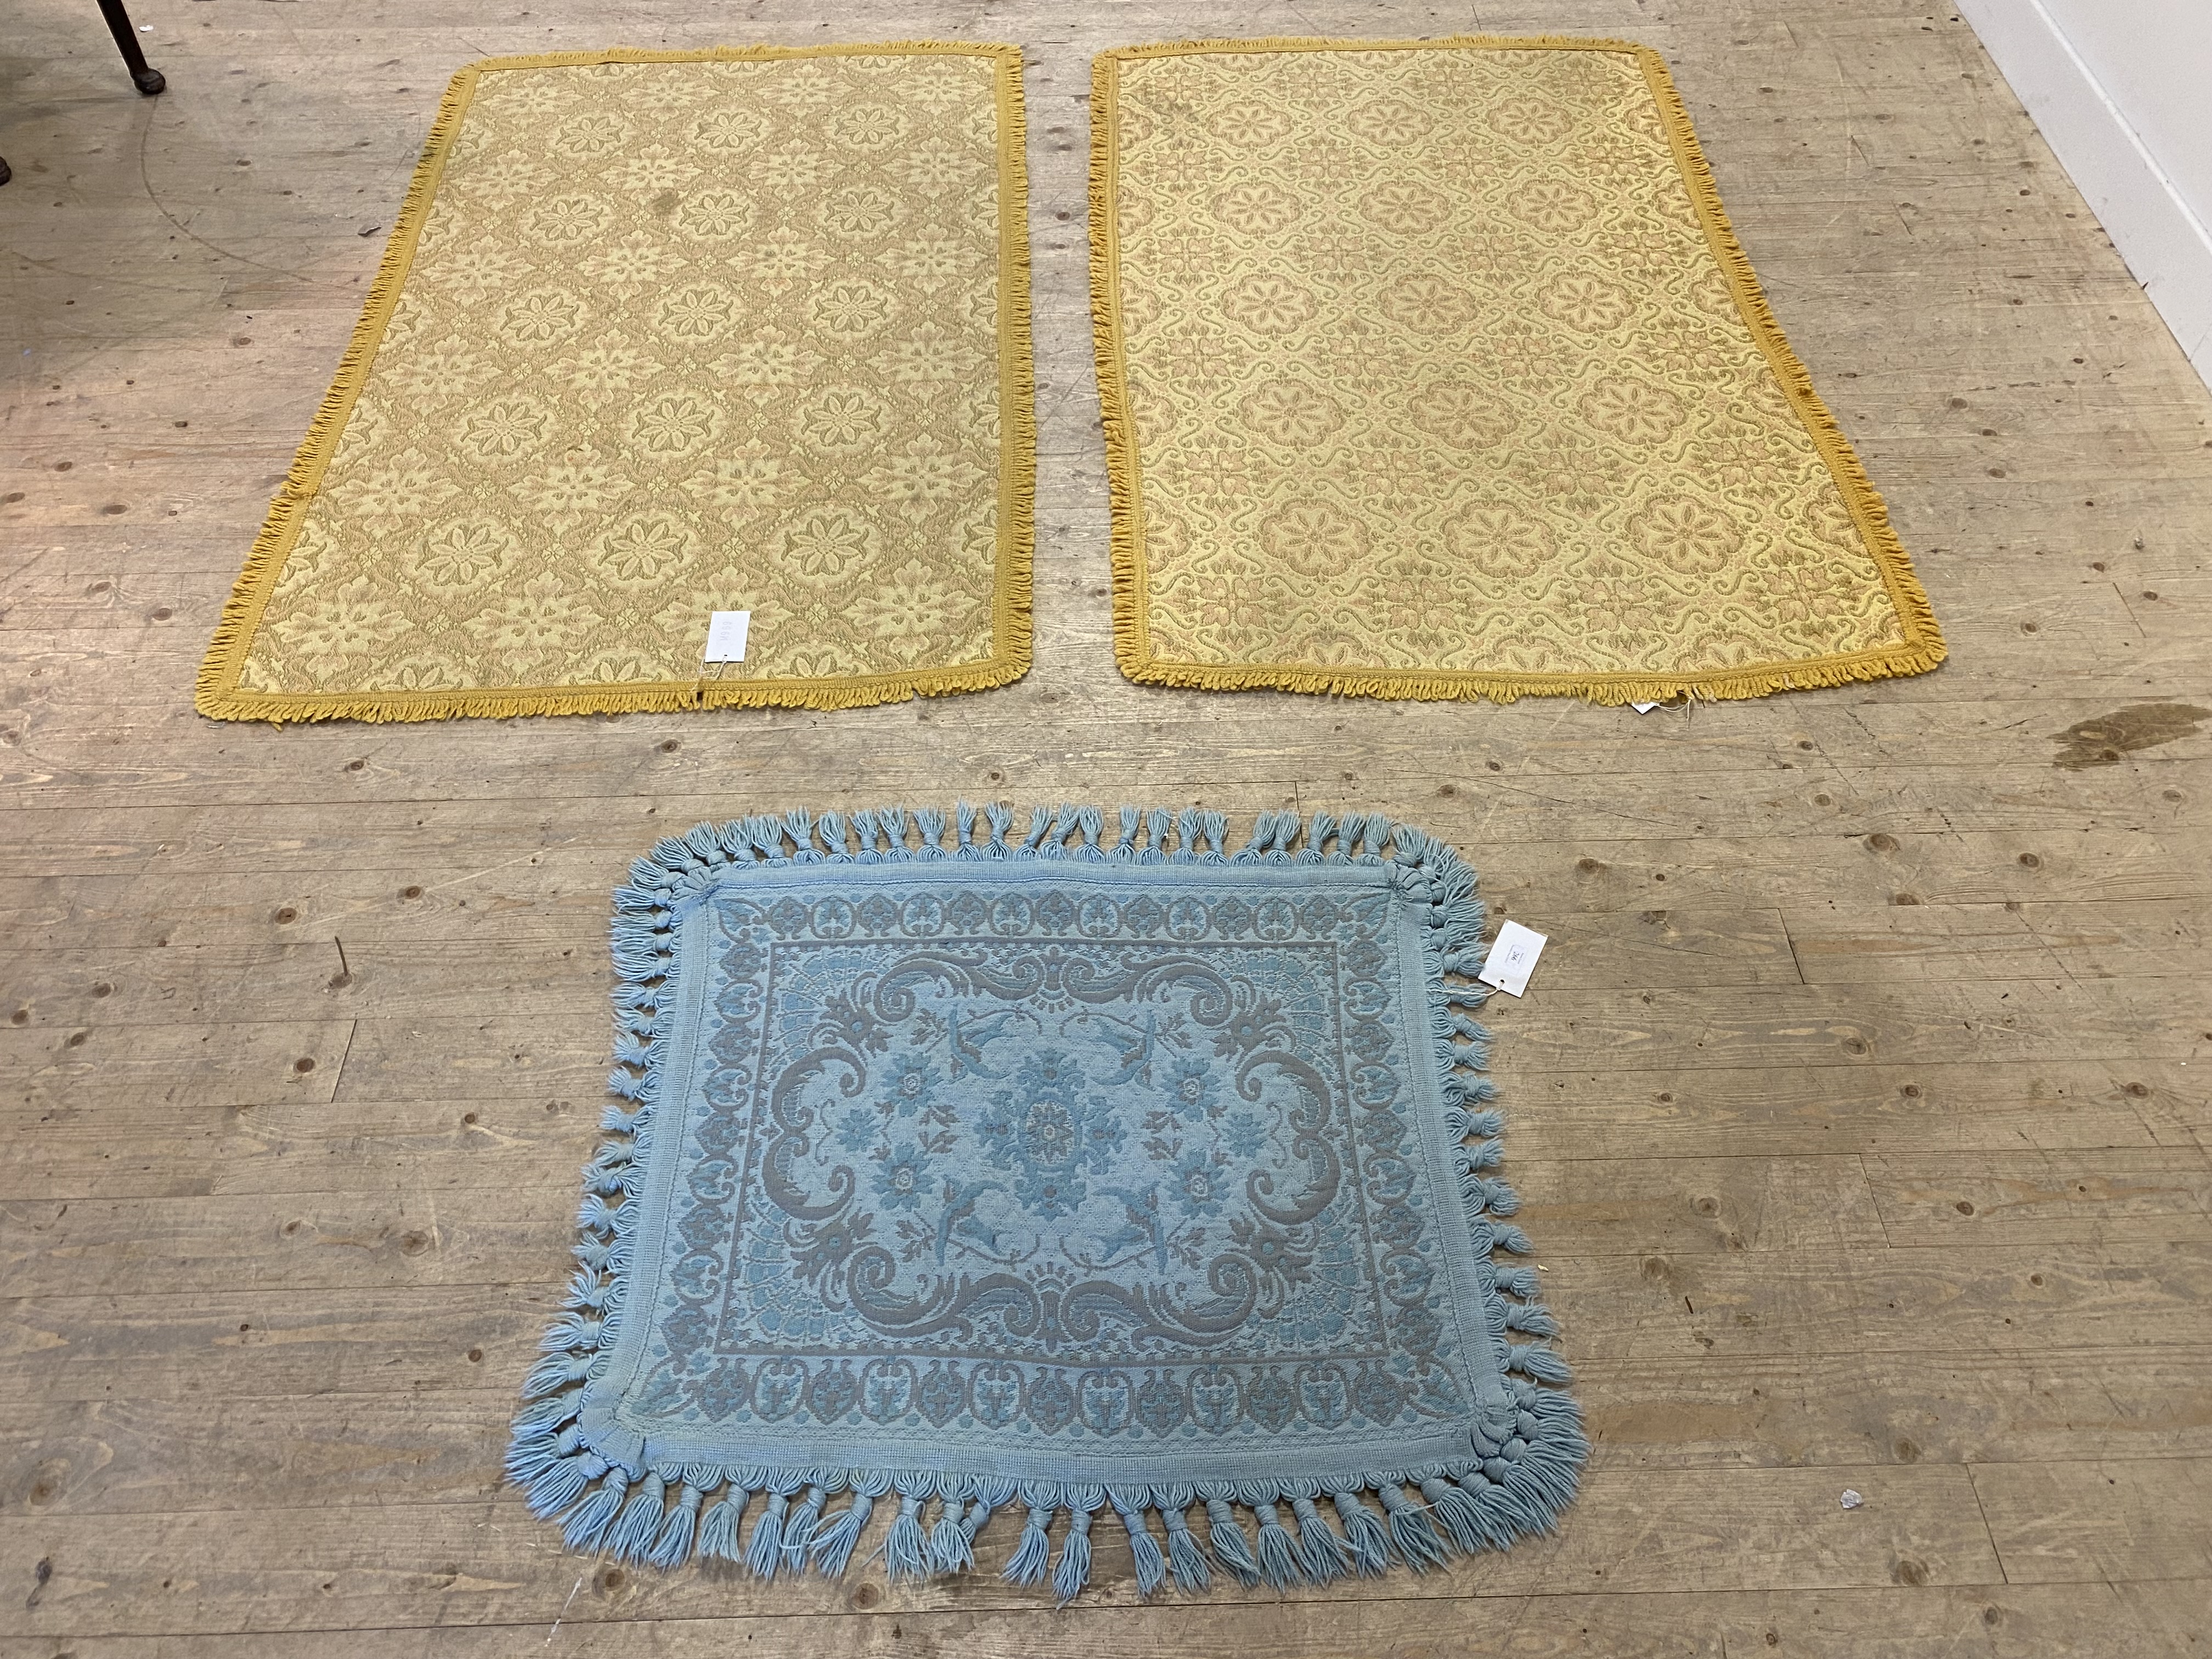 Casa Pupo, a pair of vintage embroidered wool and cotton blend rugs, the yellow ground with floral - Image 2 of 2